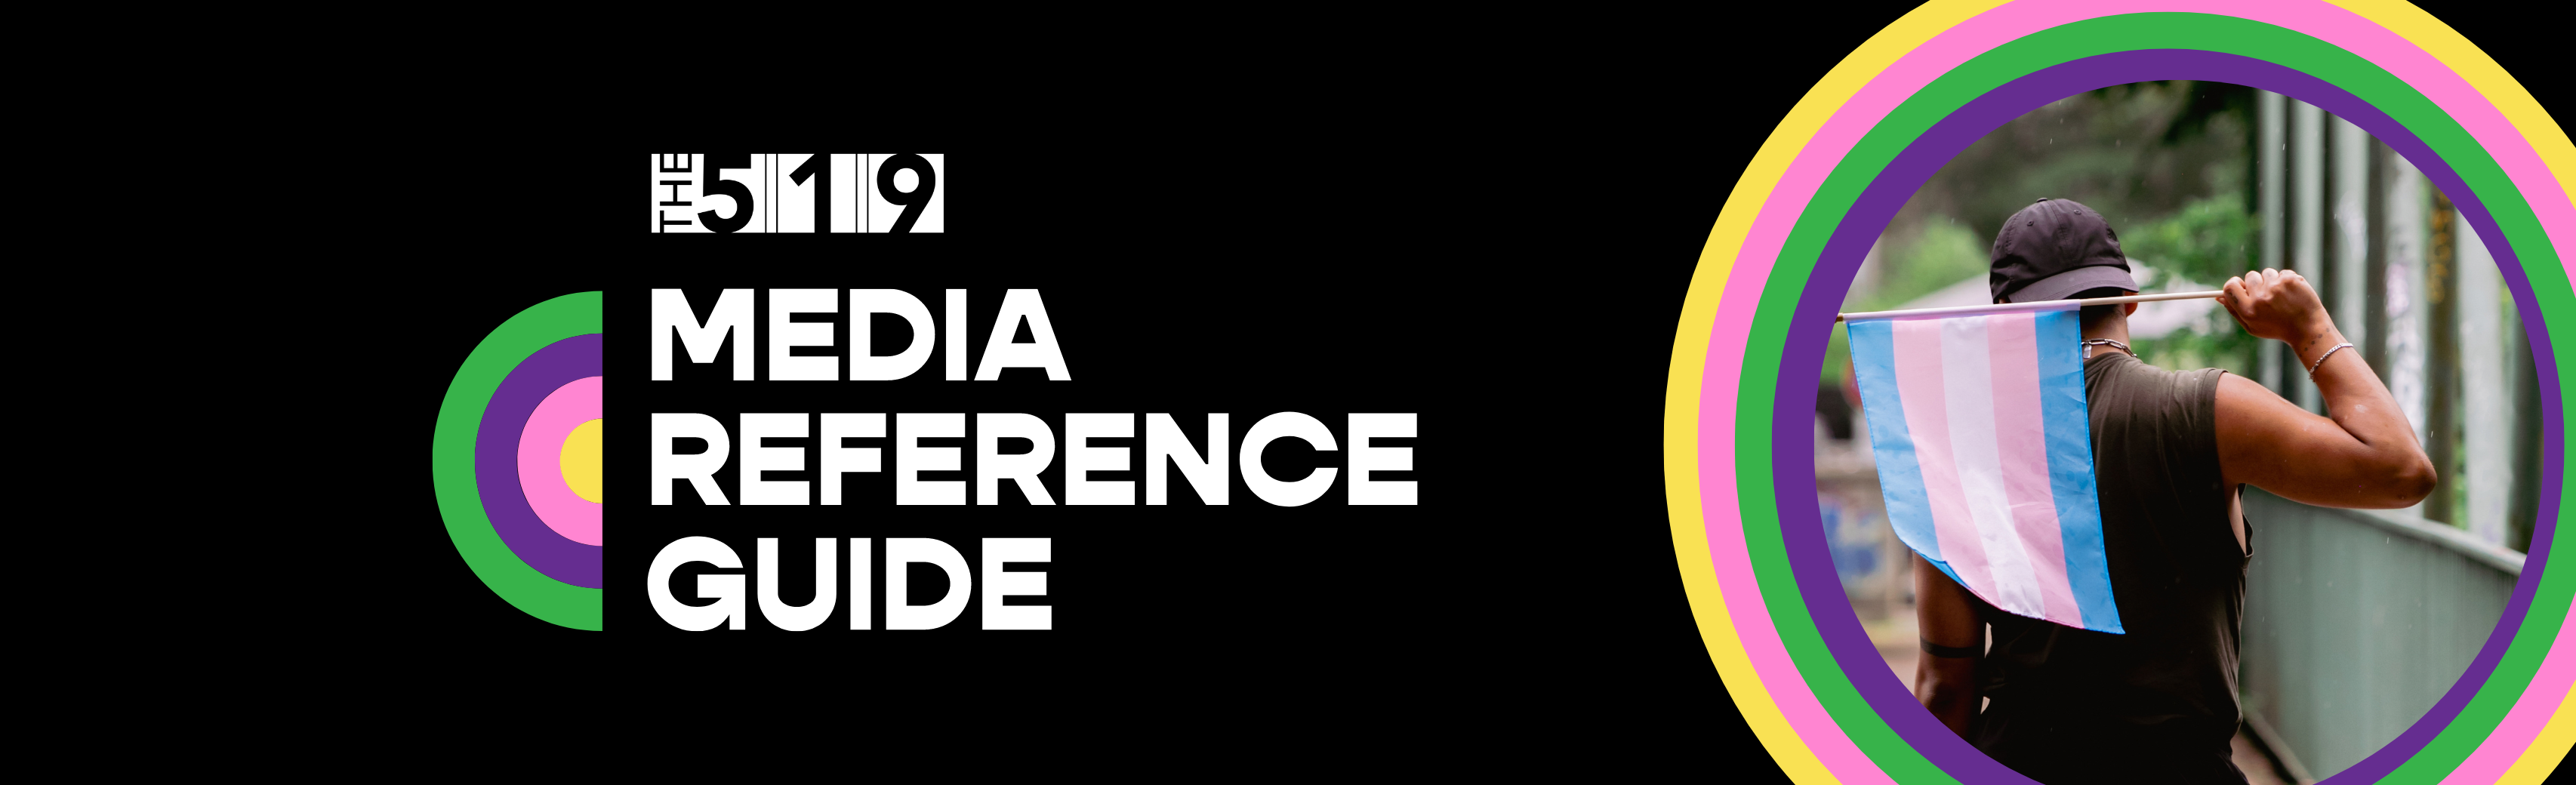 The 519 Media Reference Guide